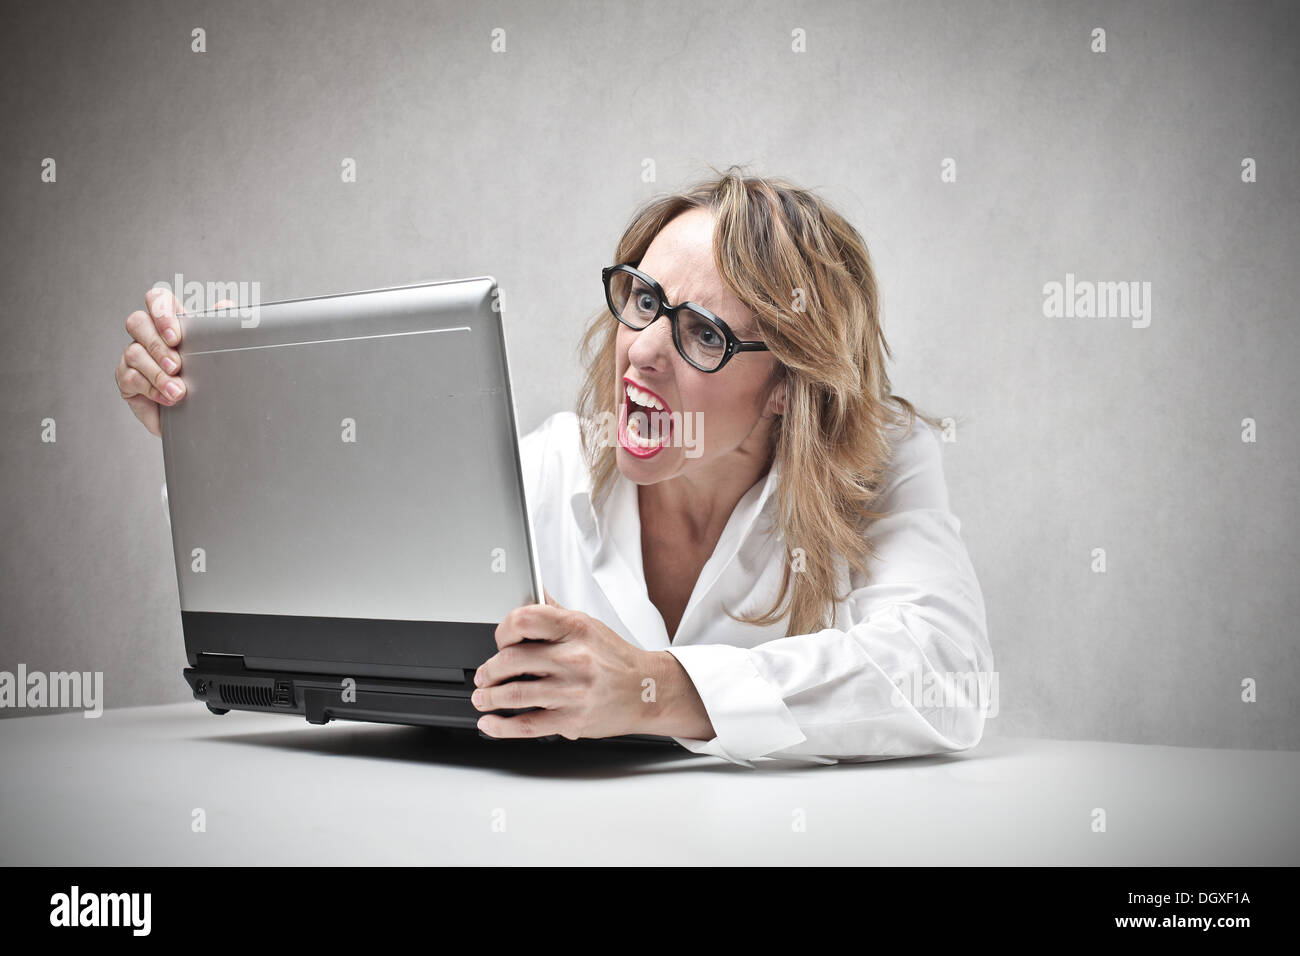 Blonde woman with glasses screaming against a laptop Stock Photo